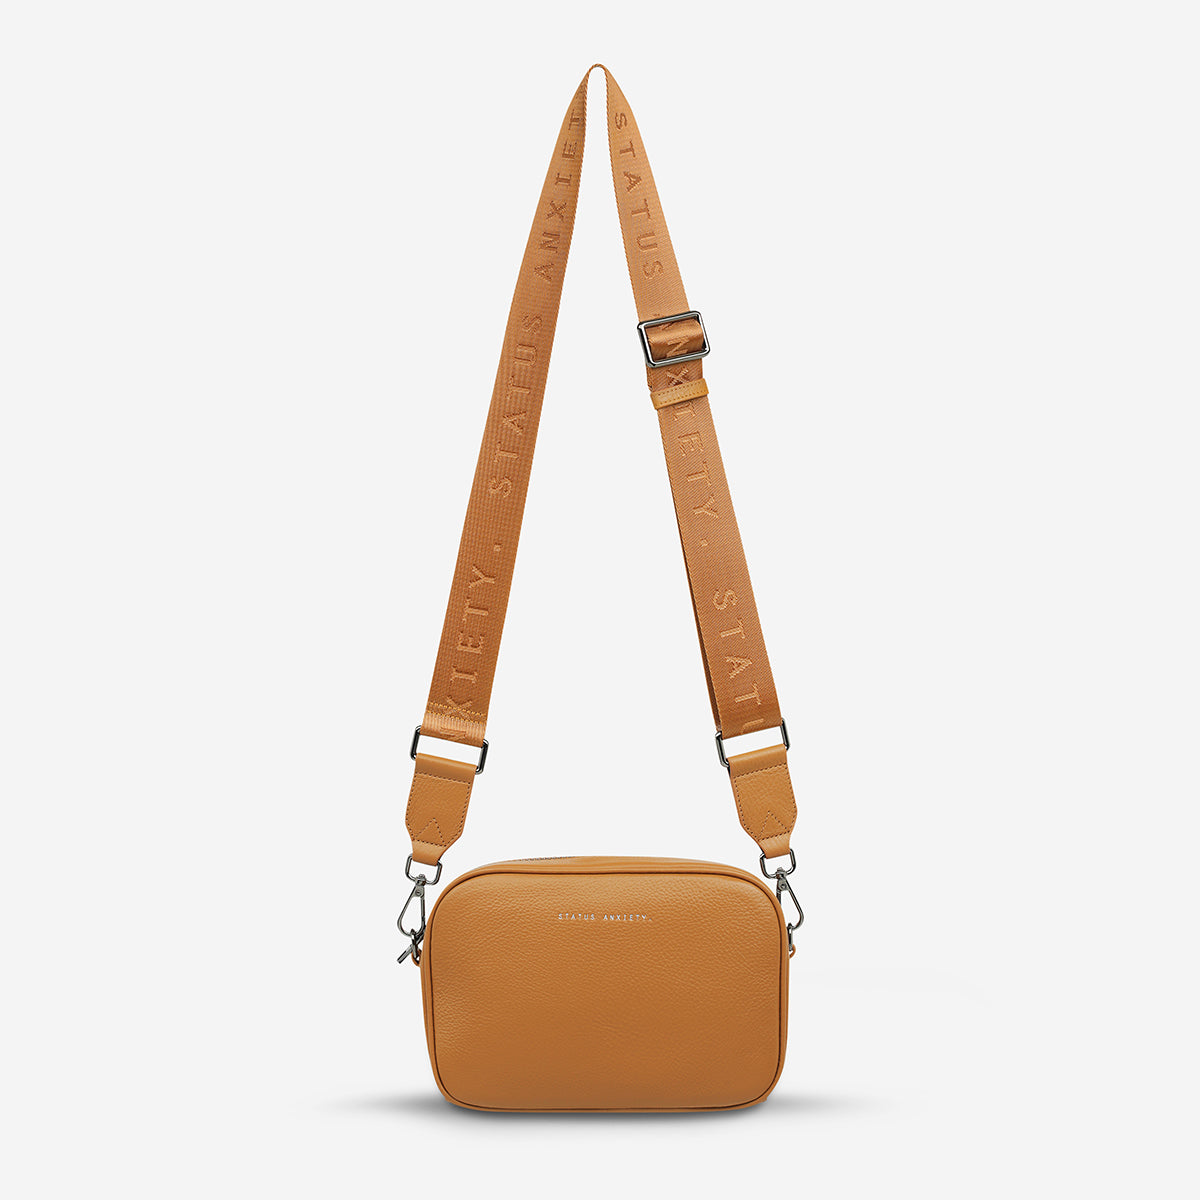 Plunder With Webbed Strap - Tan